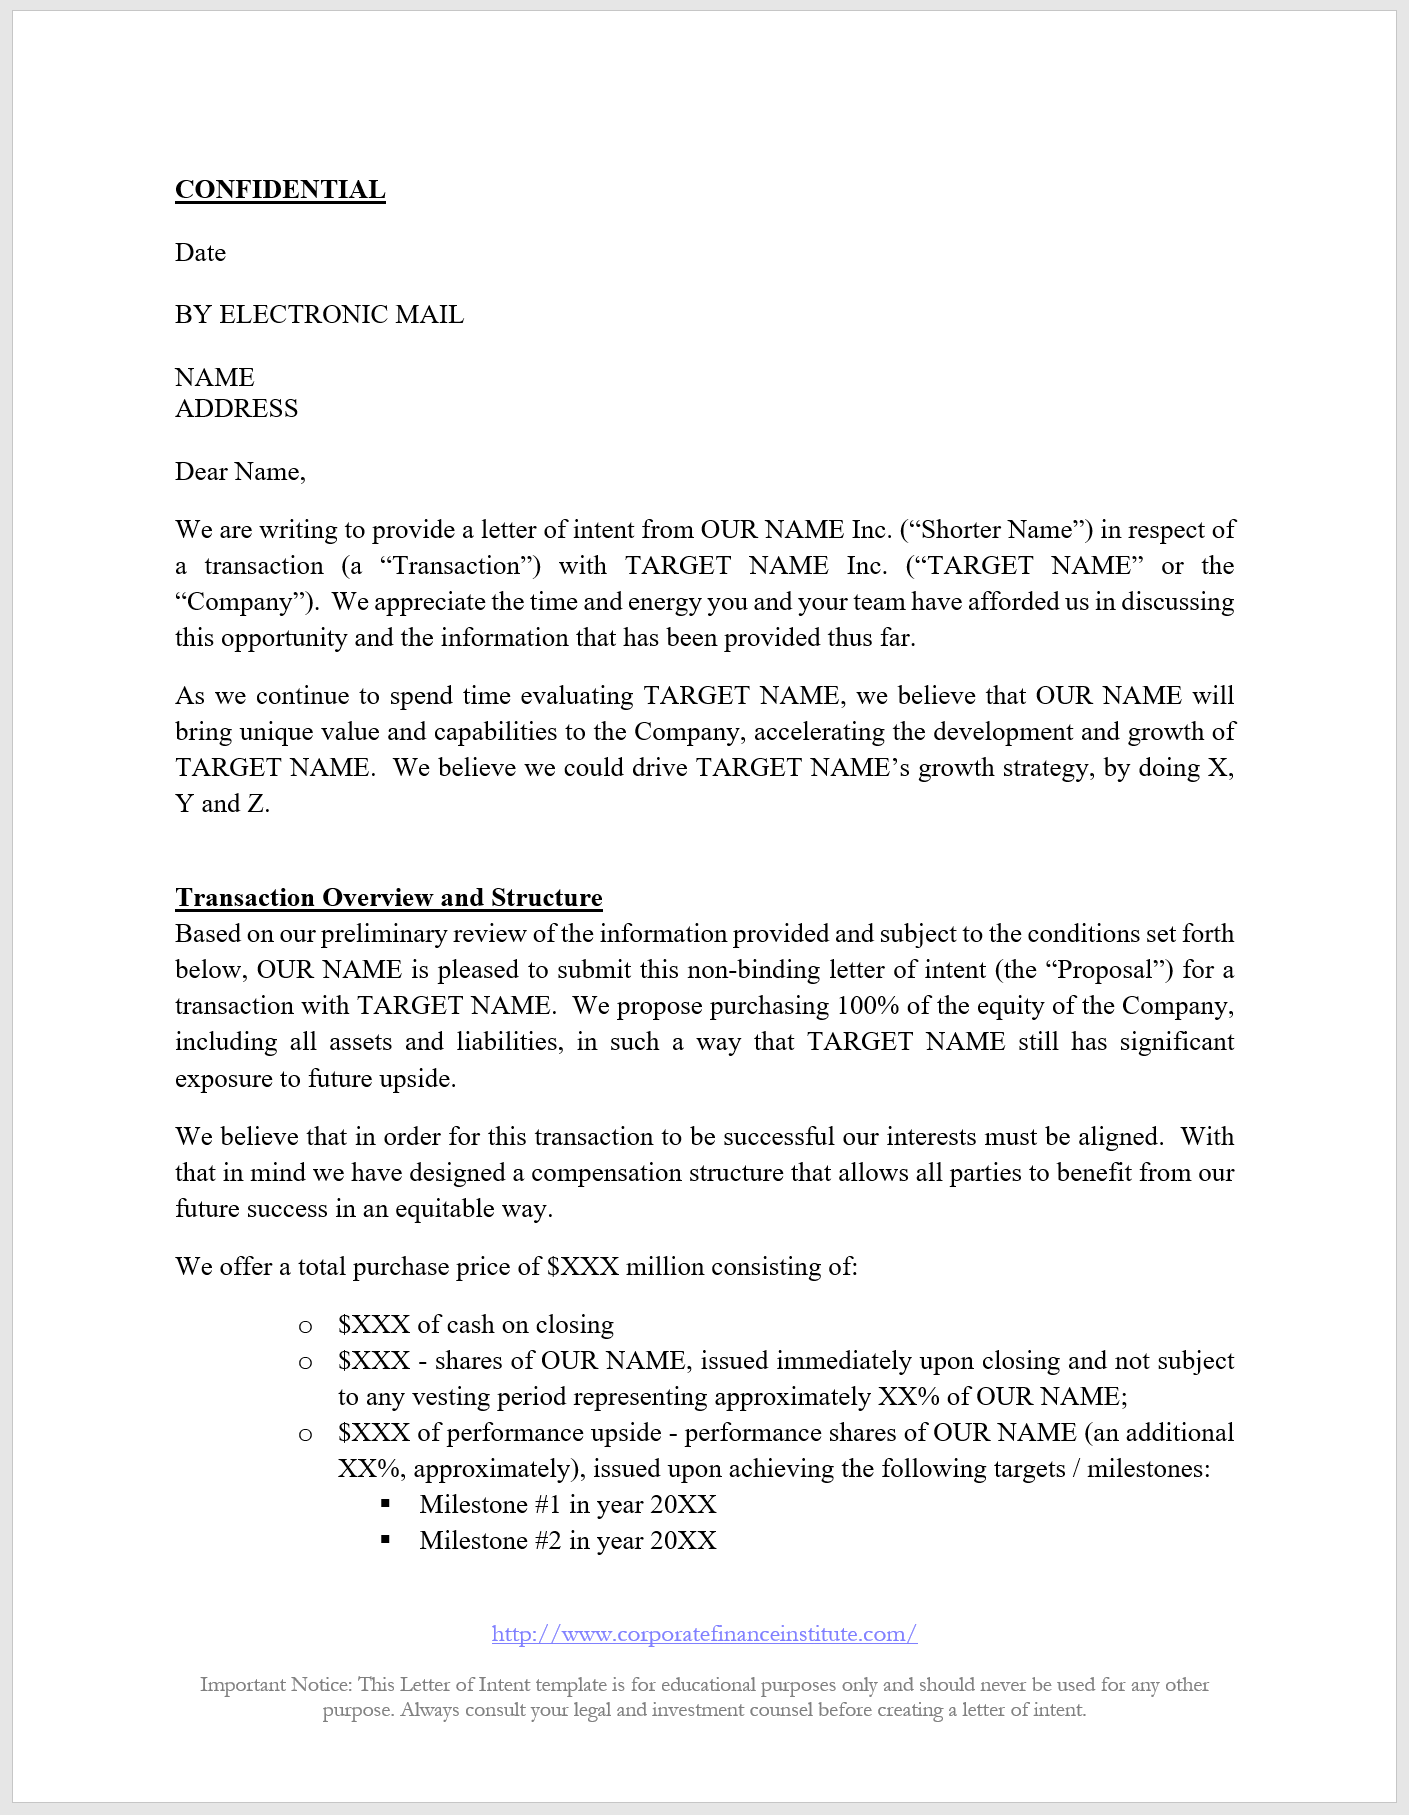 Sample Letter Offering Services from corporatefinanceinstitute.com